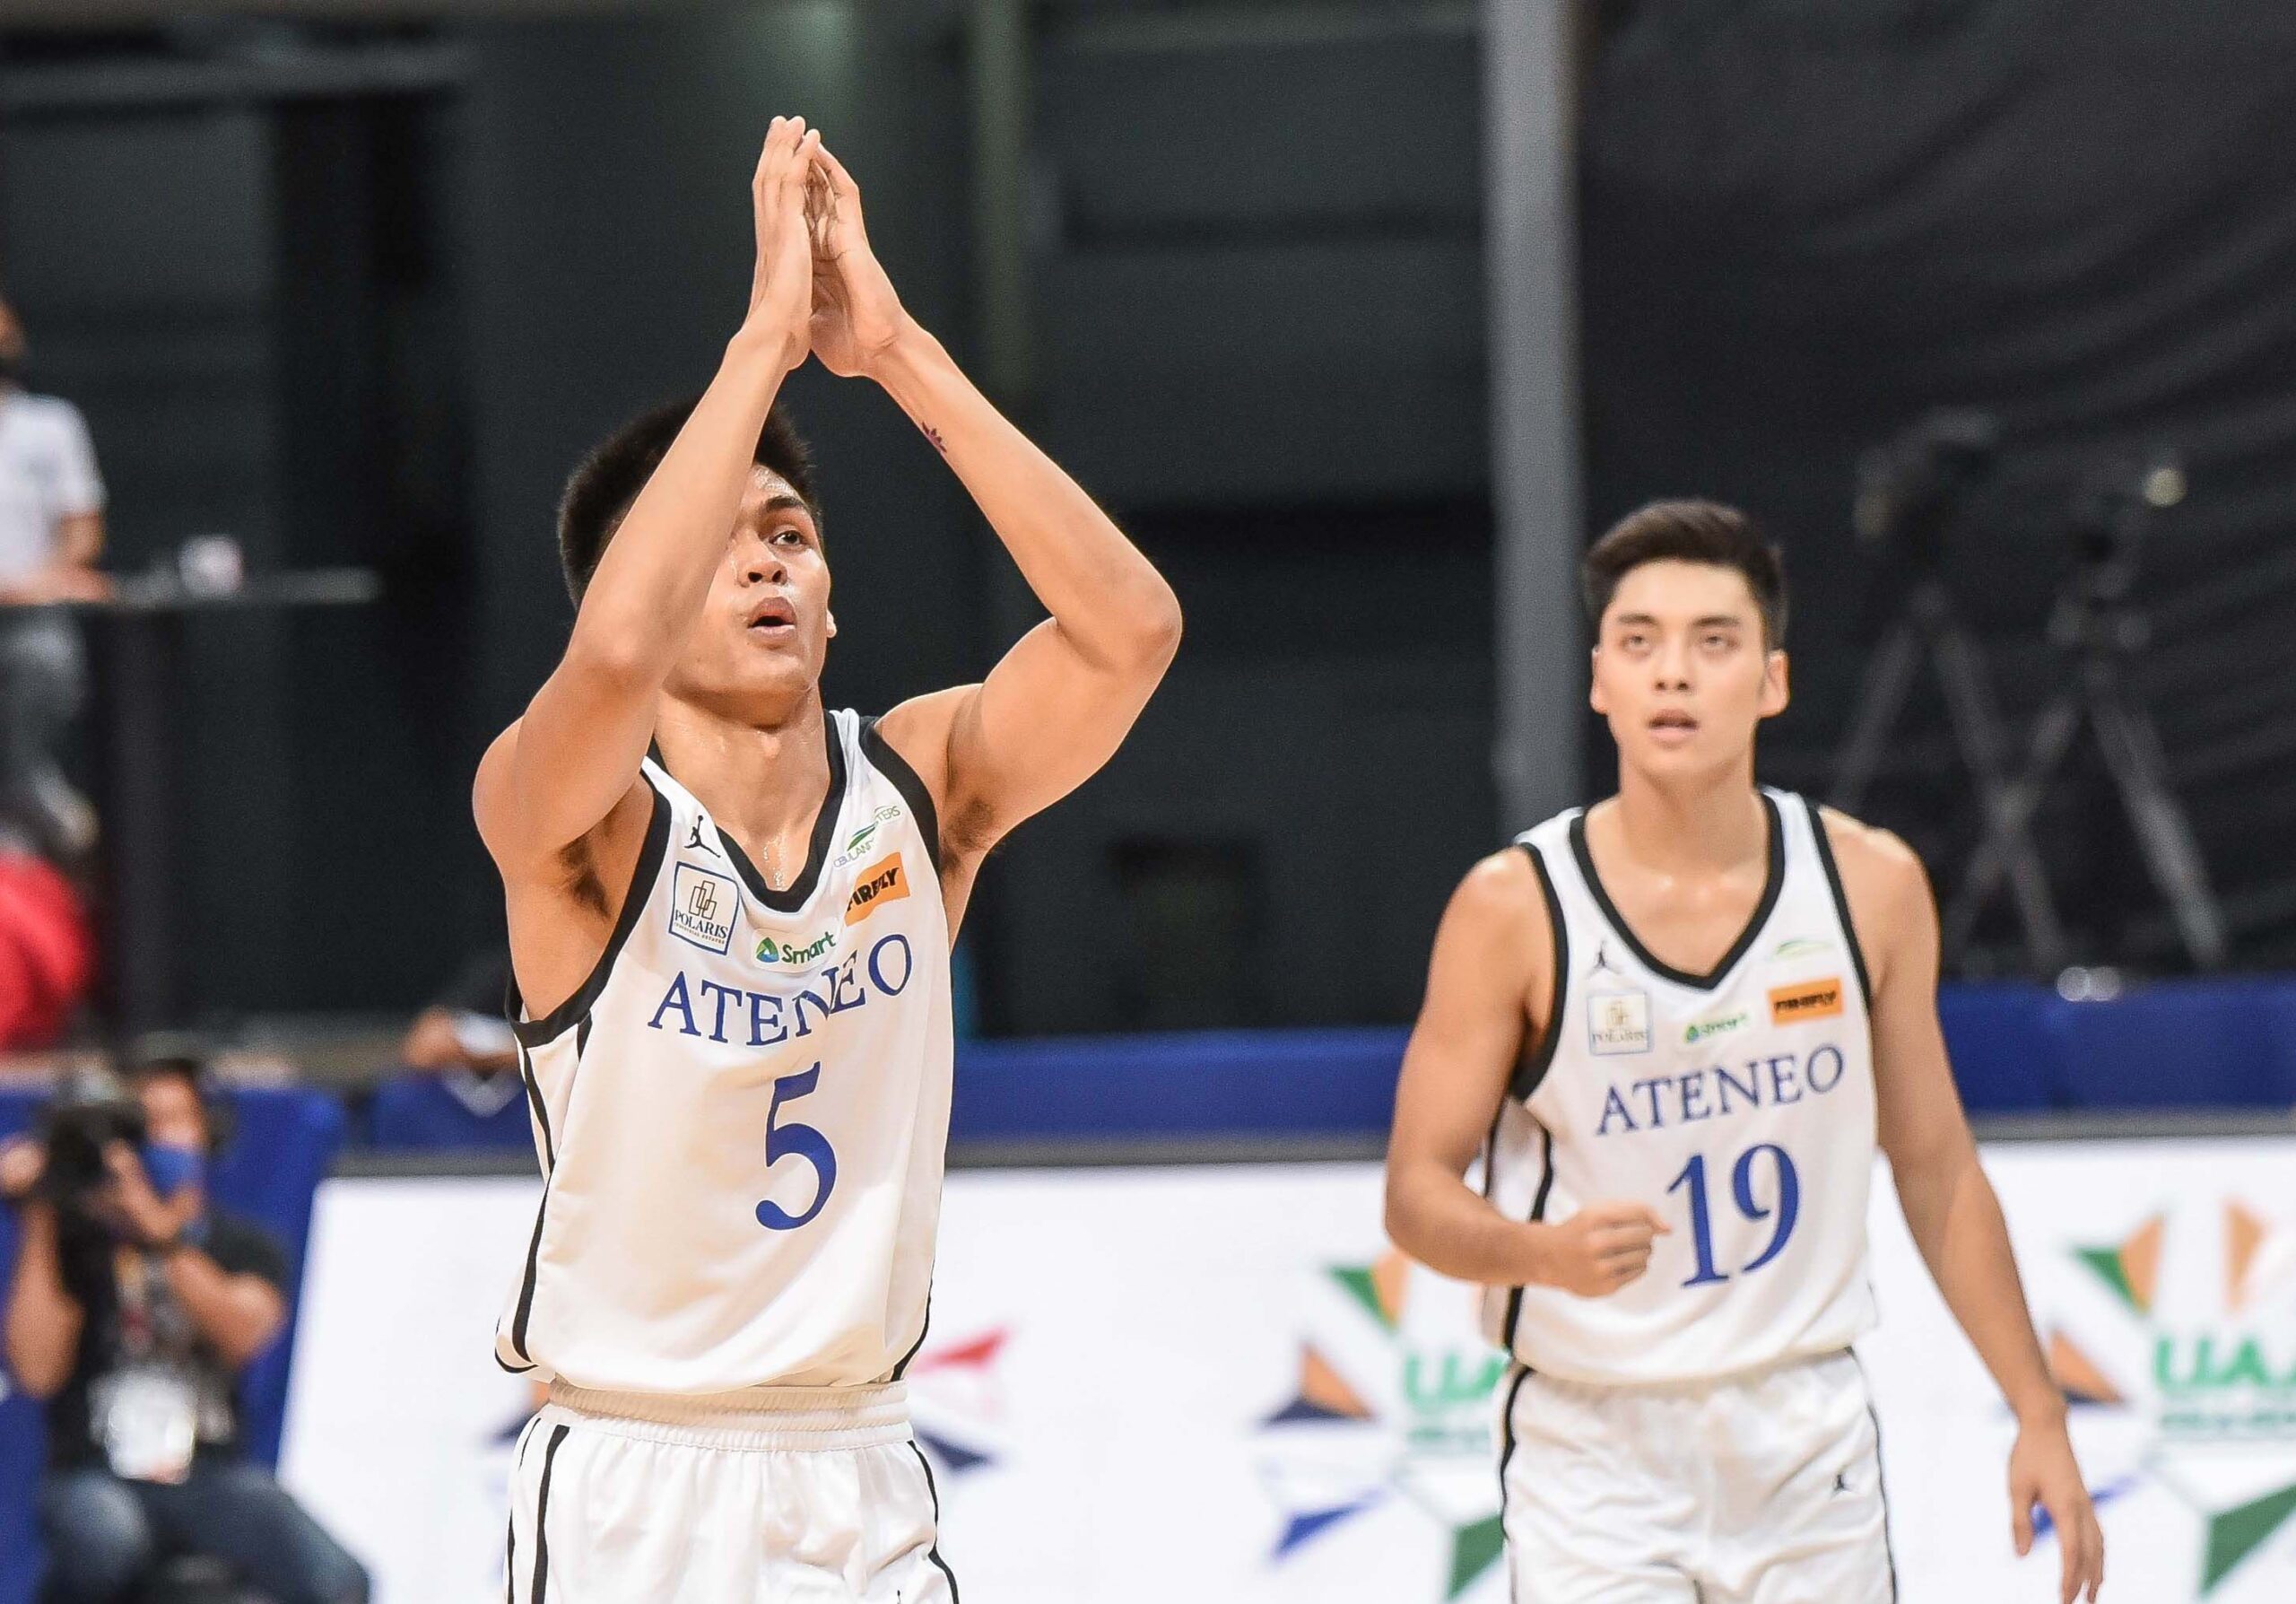 With UAAP finals looming, Ateneo’s Mamuyac, Tio join PBA Draft